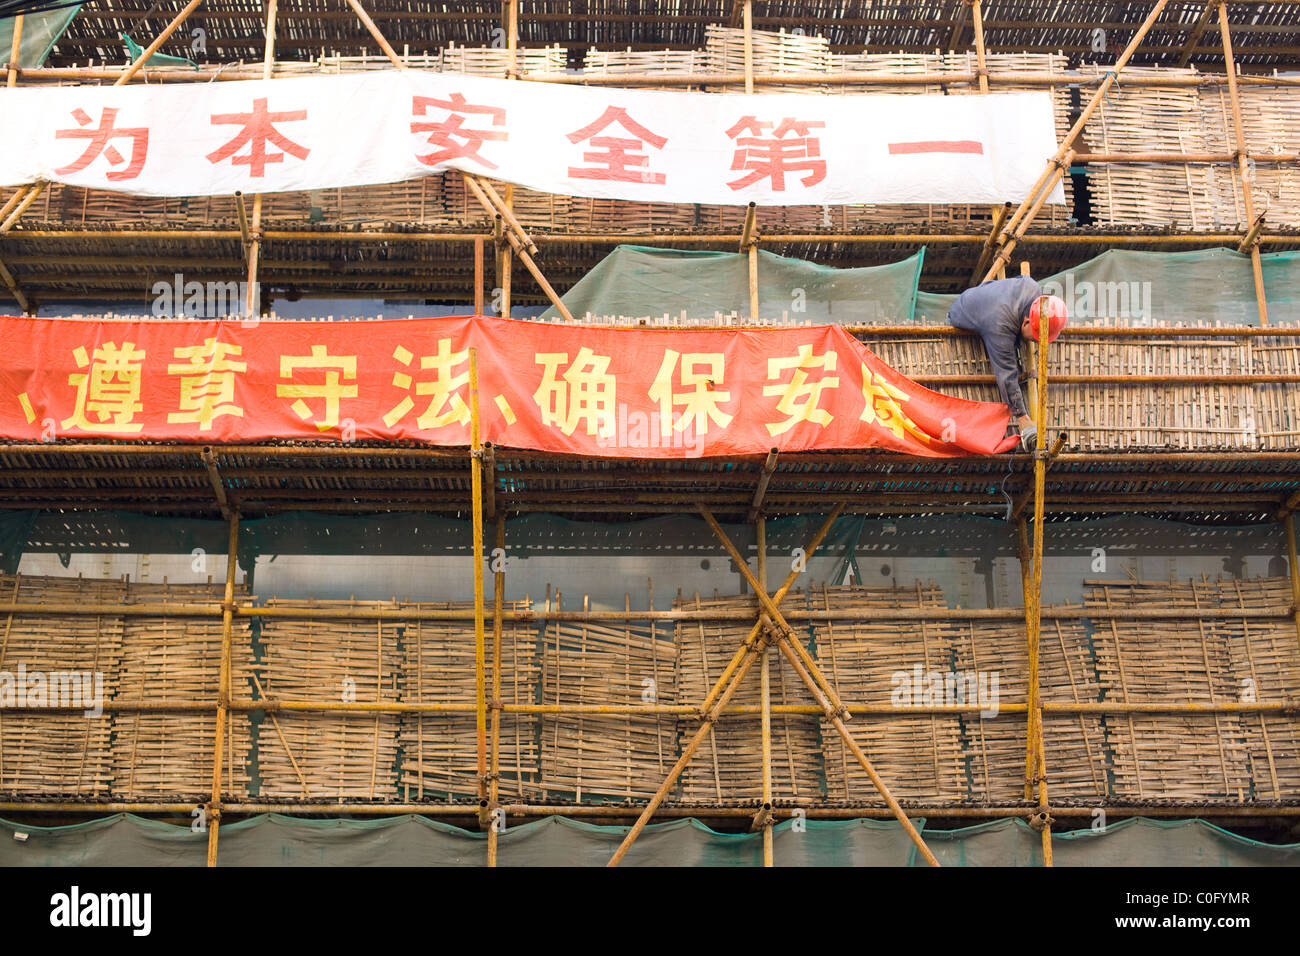 Worker in traditional Chinese scaffolding arranging a banner, Shanghai, China Stock Photo